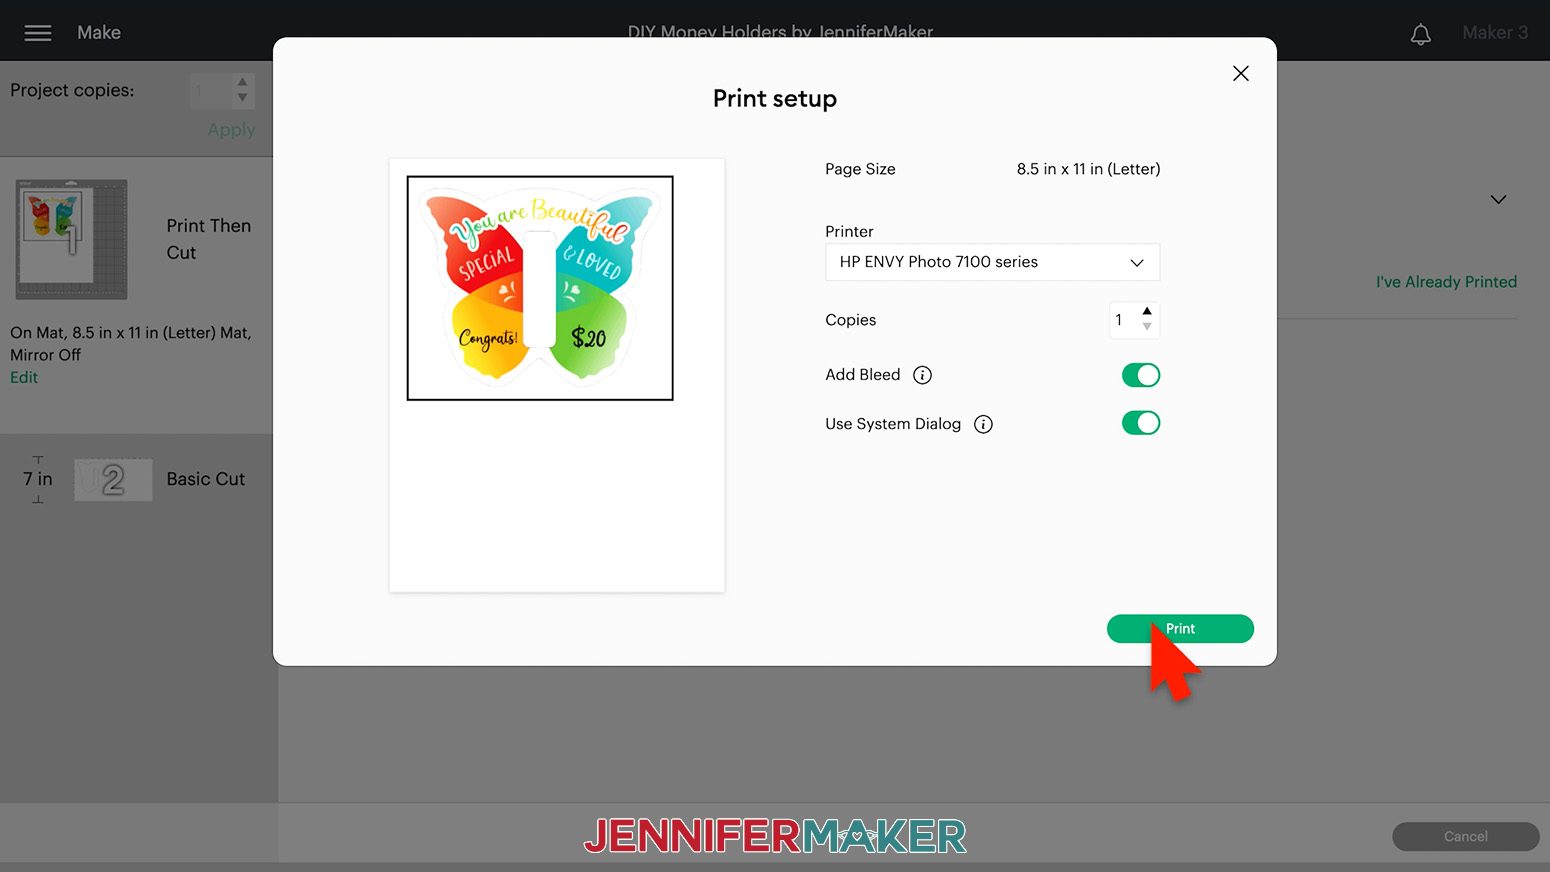 Print setup screen in Cricut Design Space showing the butterfly design for the DIY money holders project. Add Bleed and Use System Dialog sliders are both green.